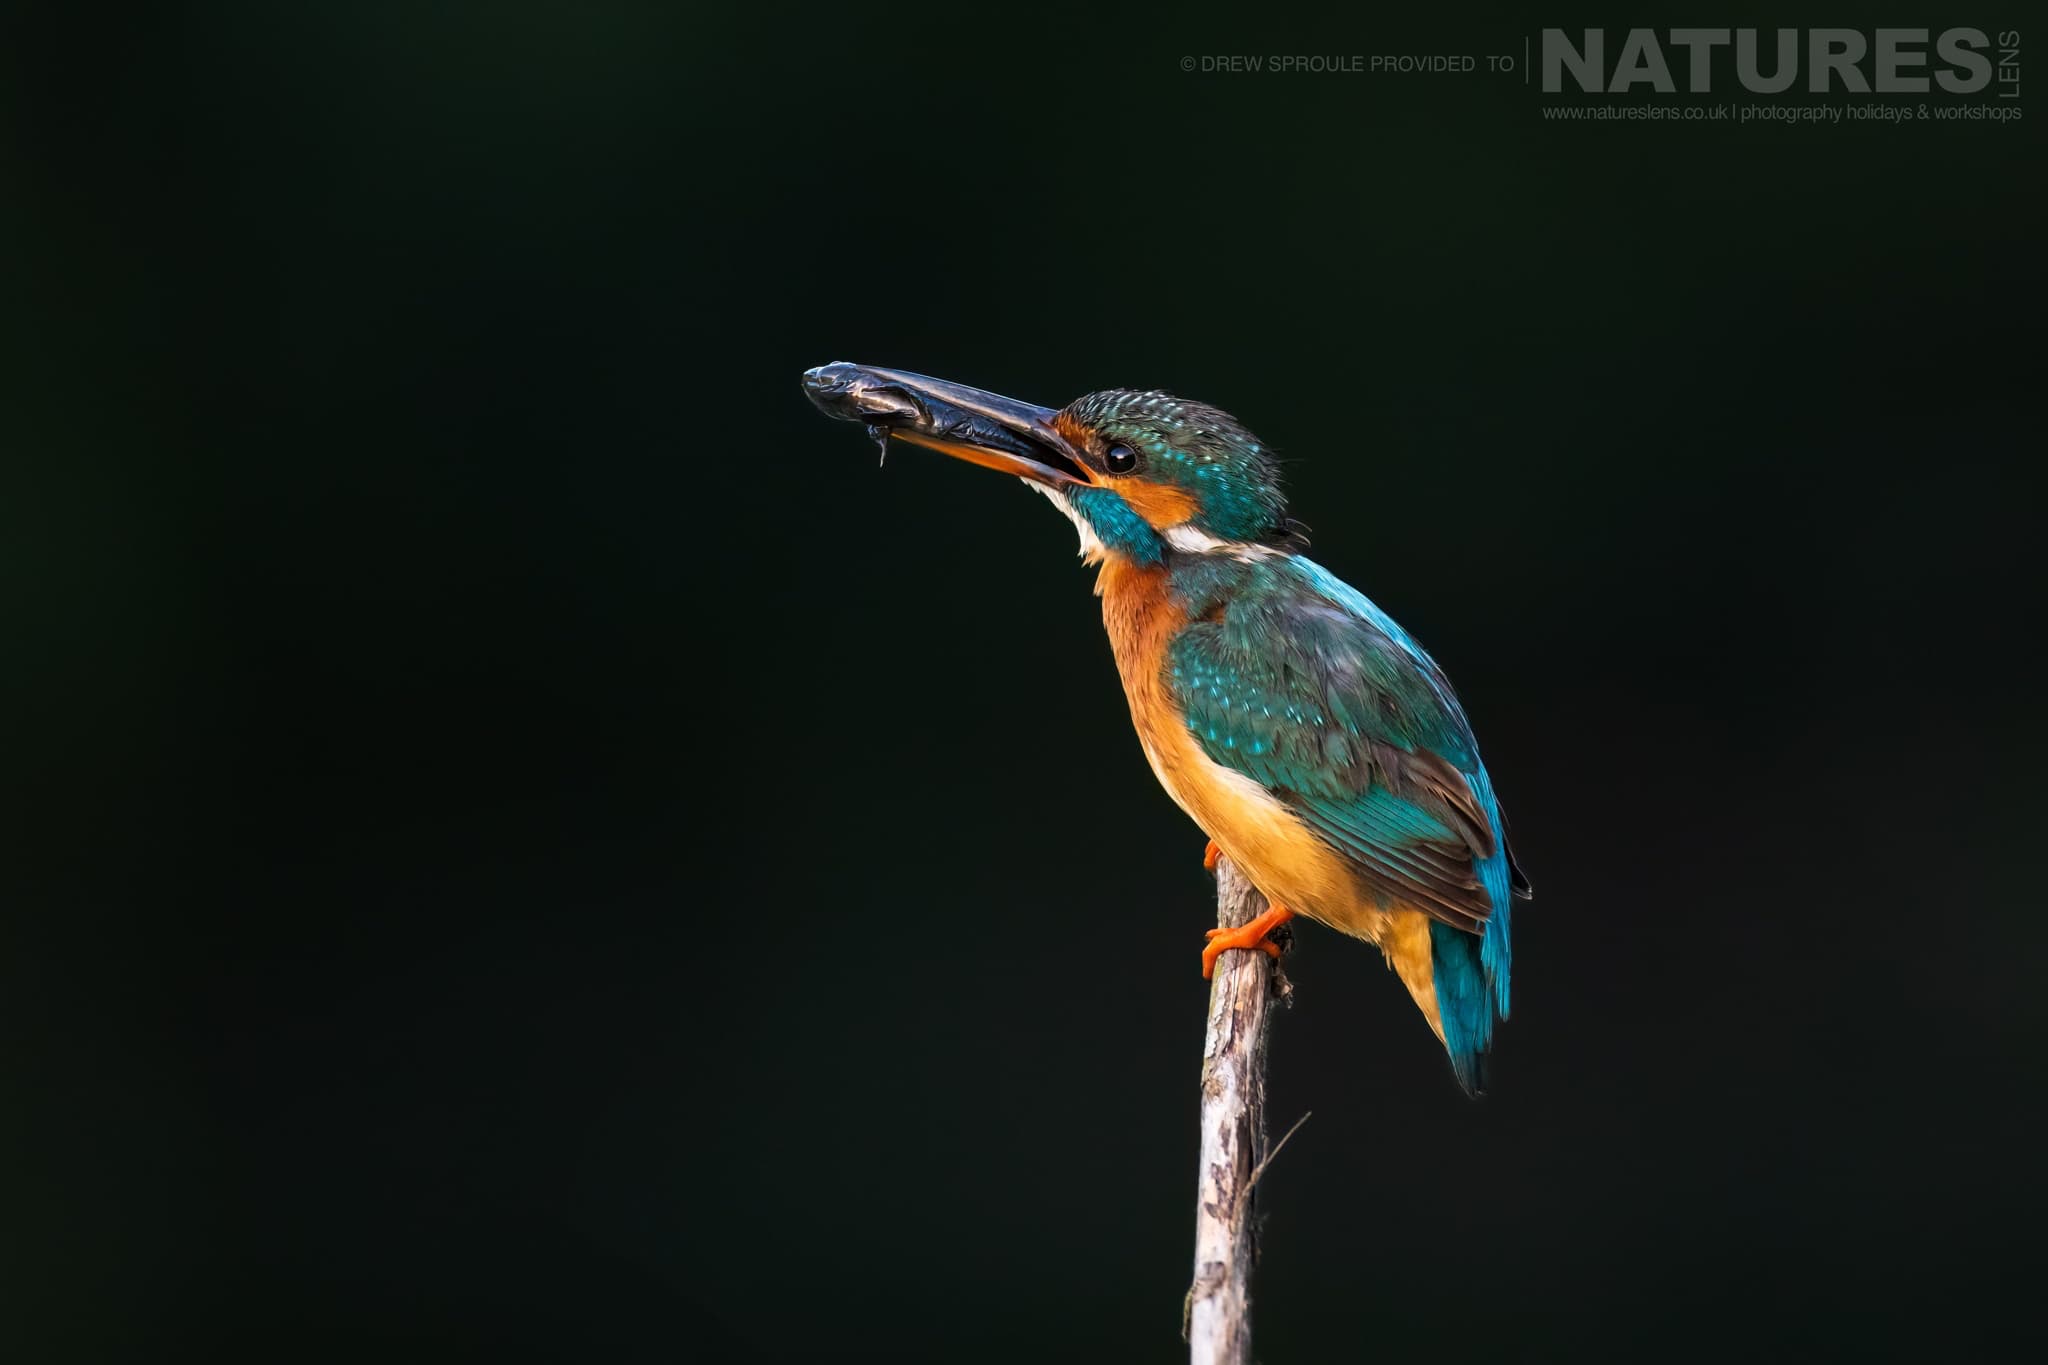 A Kingfisher With A Fish In It's Beak Typical Of The Kind Of Image You Will Capture During The Birdlife Of The Danube Delta Photography Trip